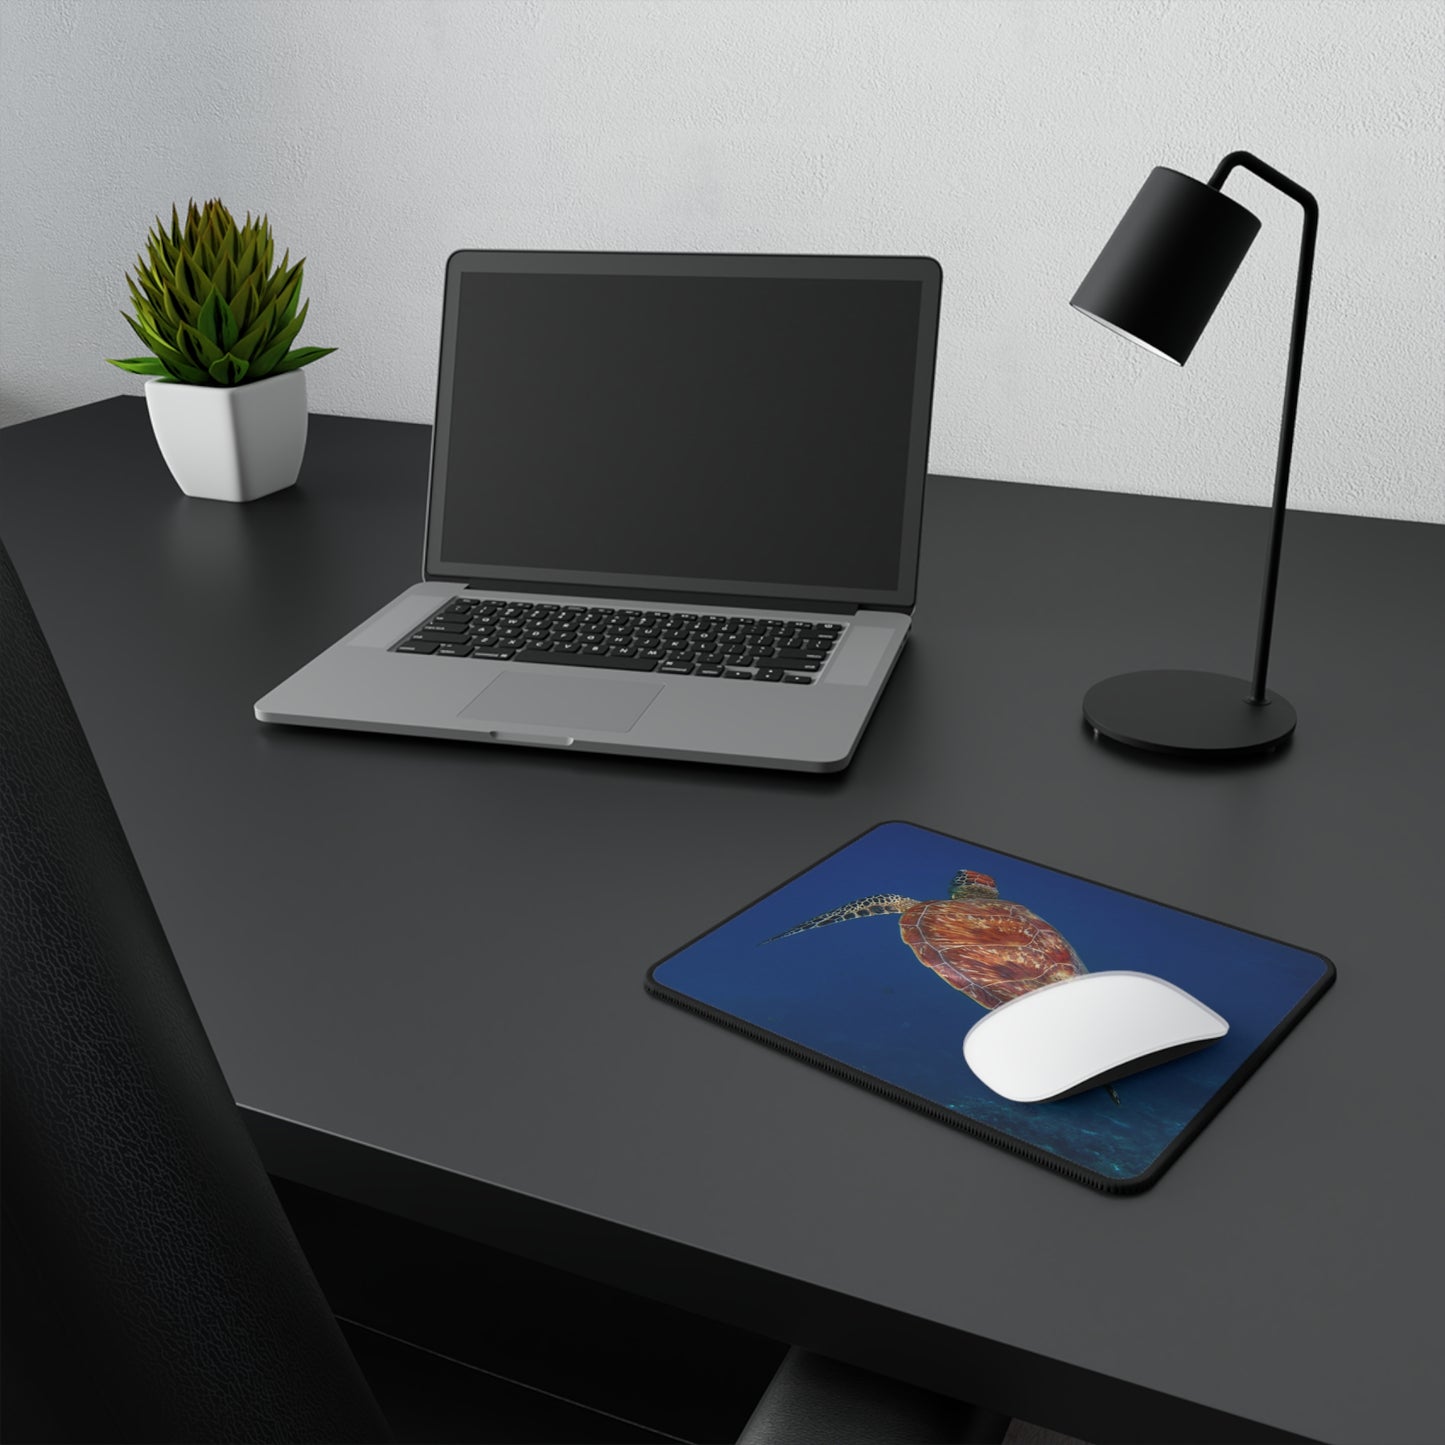 Green turtle Mouse Pad